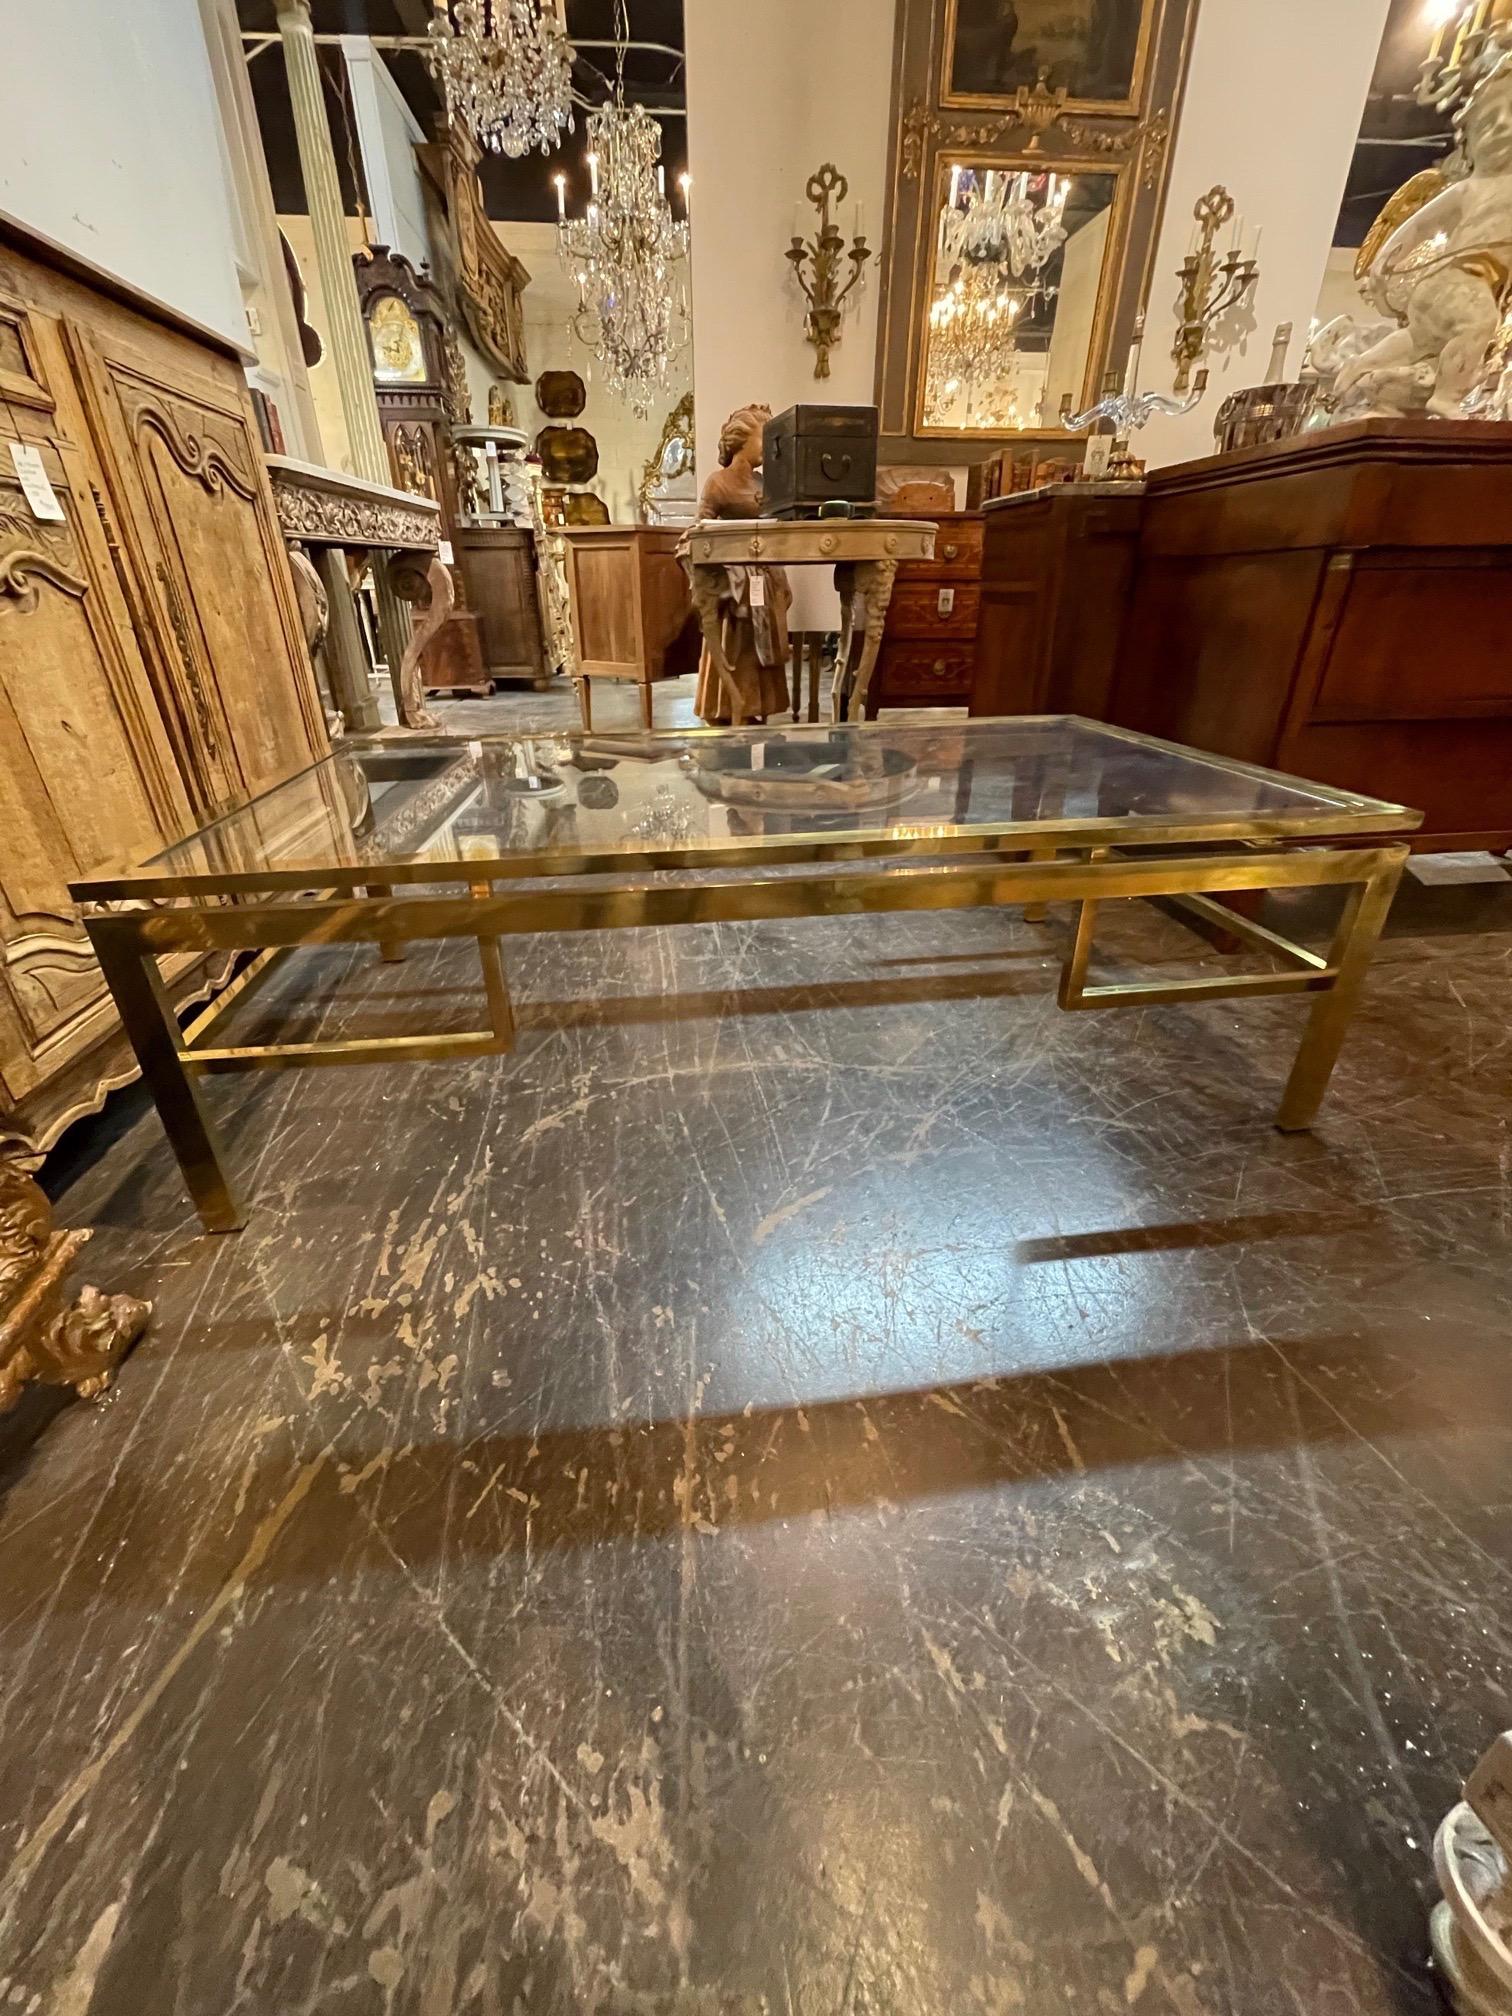 Lovely French vintage brass and glass coffee table. Creates a beautiful polished look. Very fine quality!